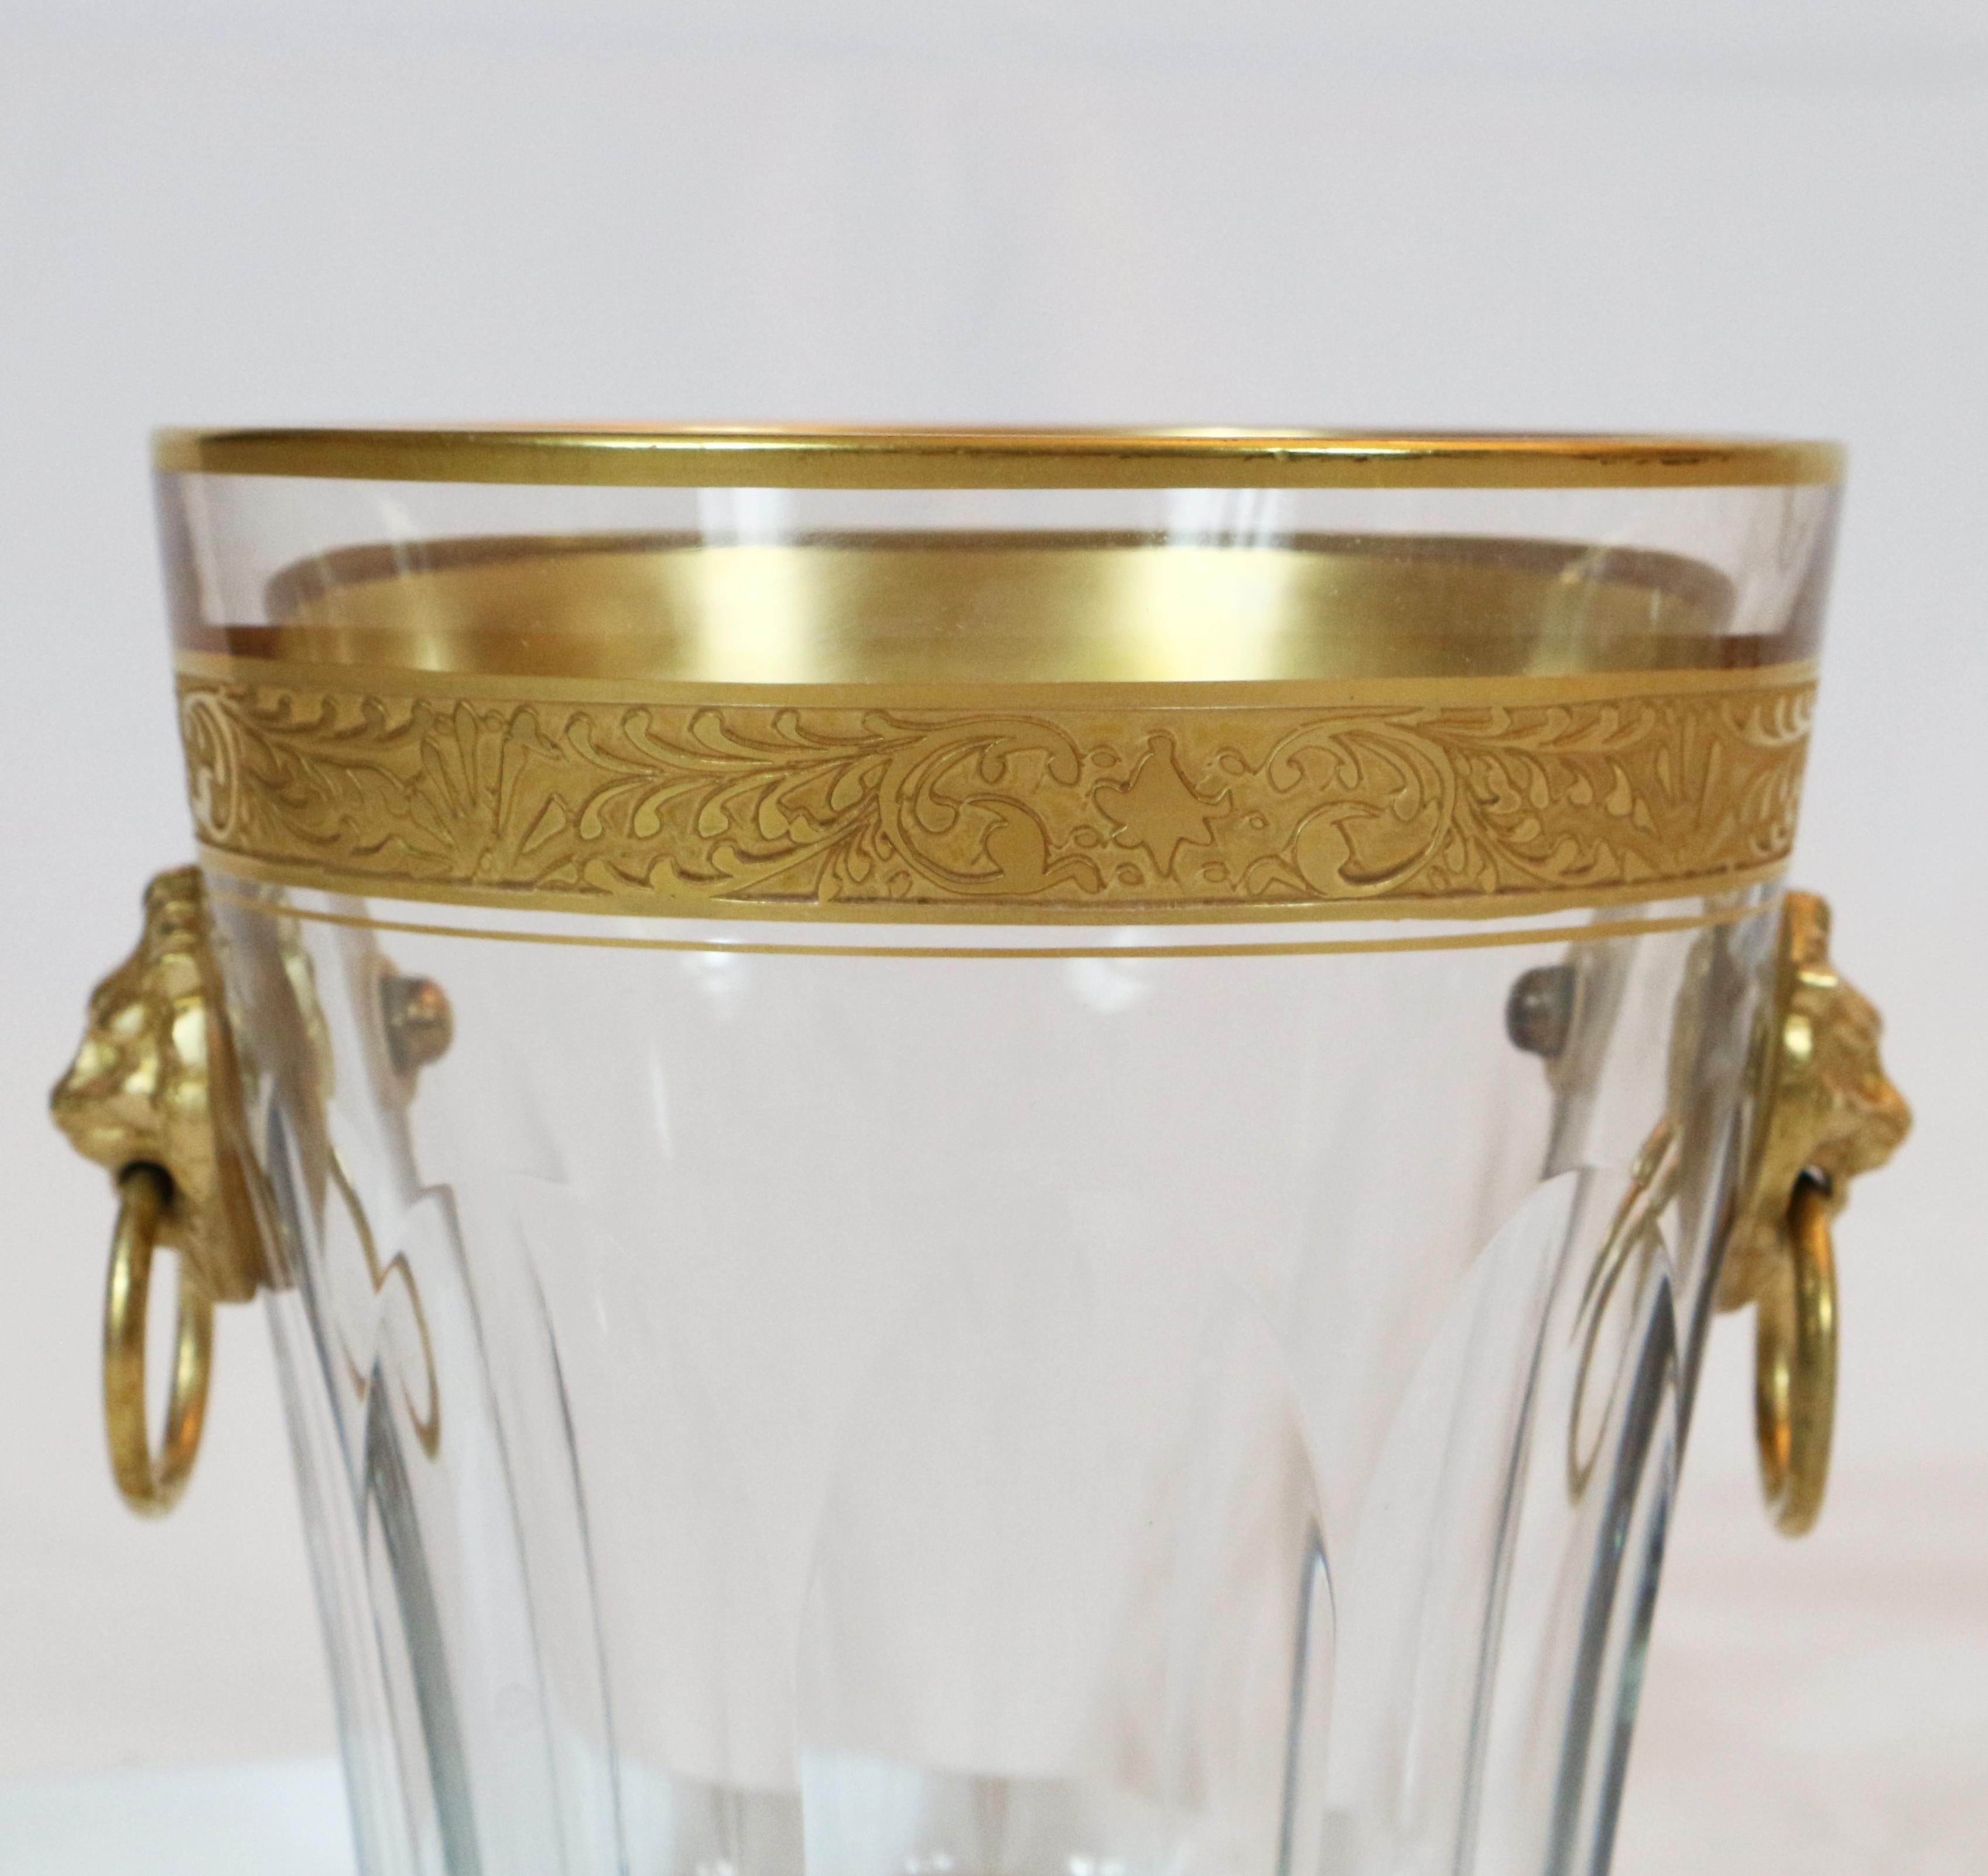 Empire Revival Baccarat Cut Crystal Ice Bucket with Gold Gilded Lions